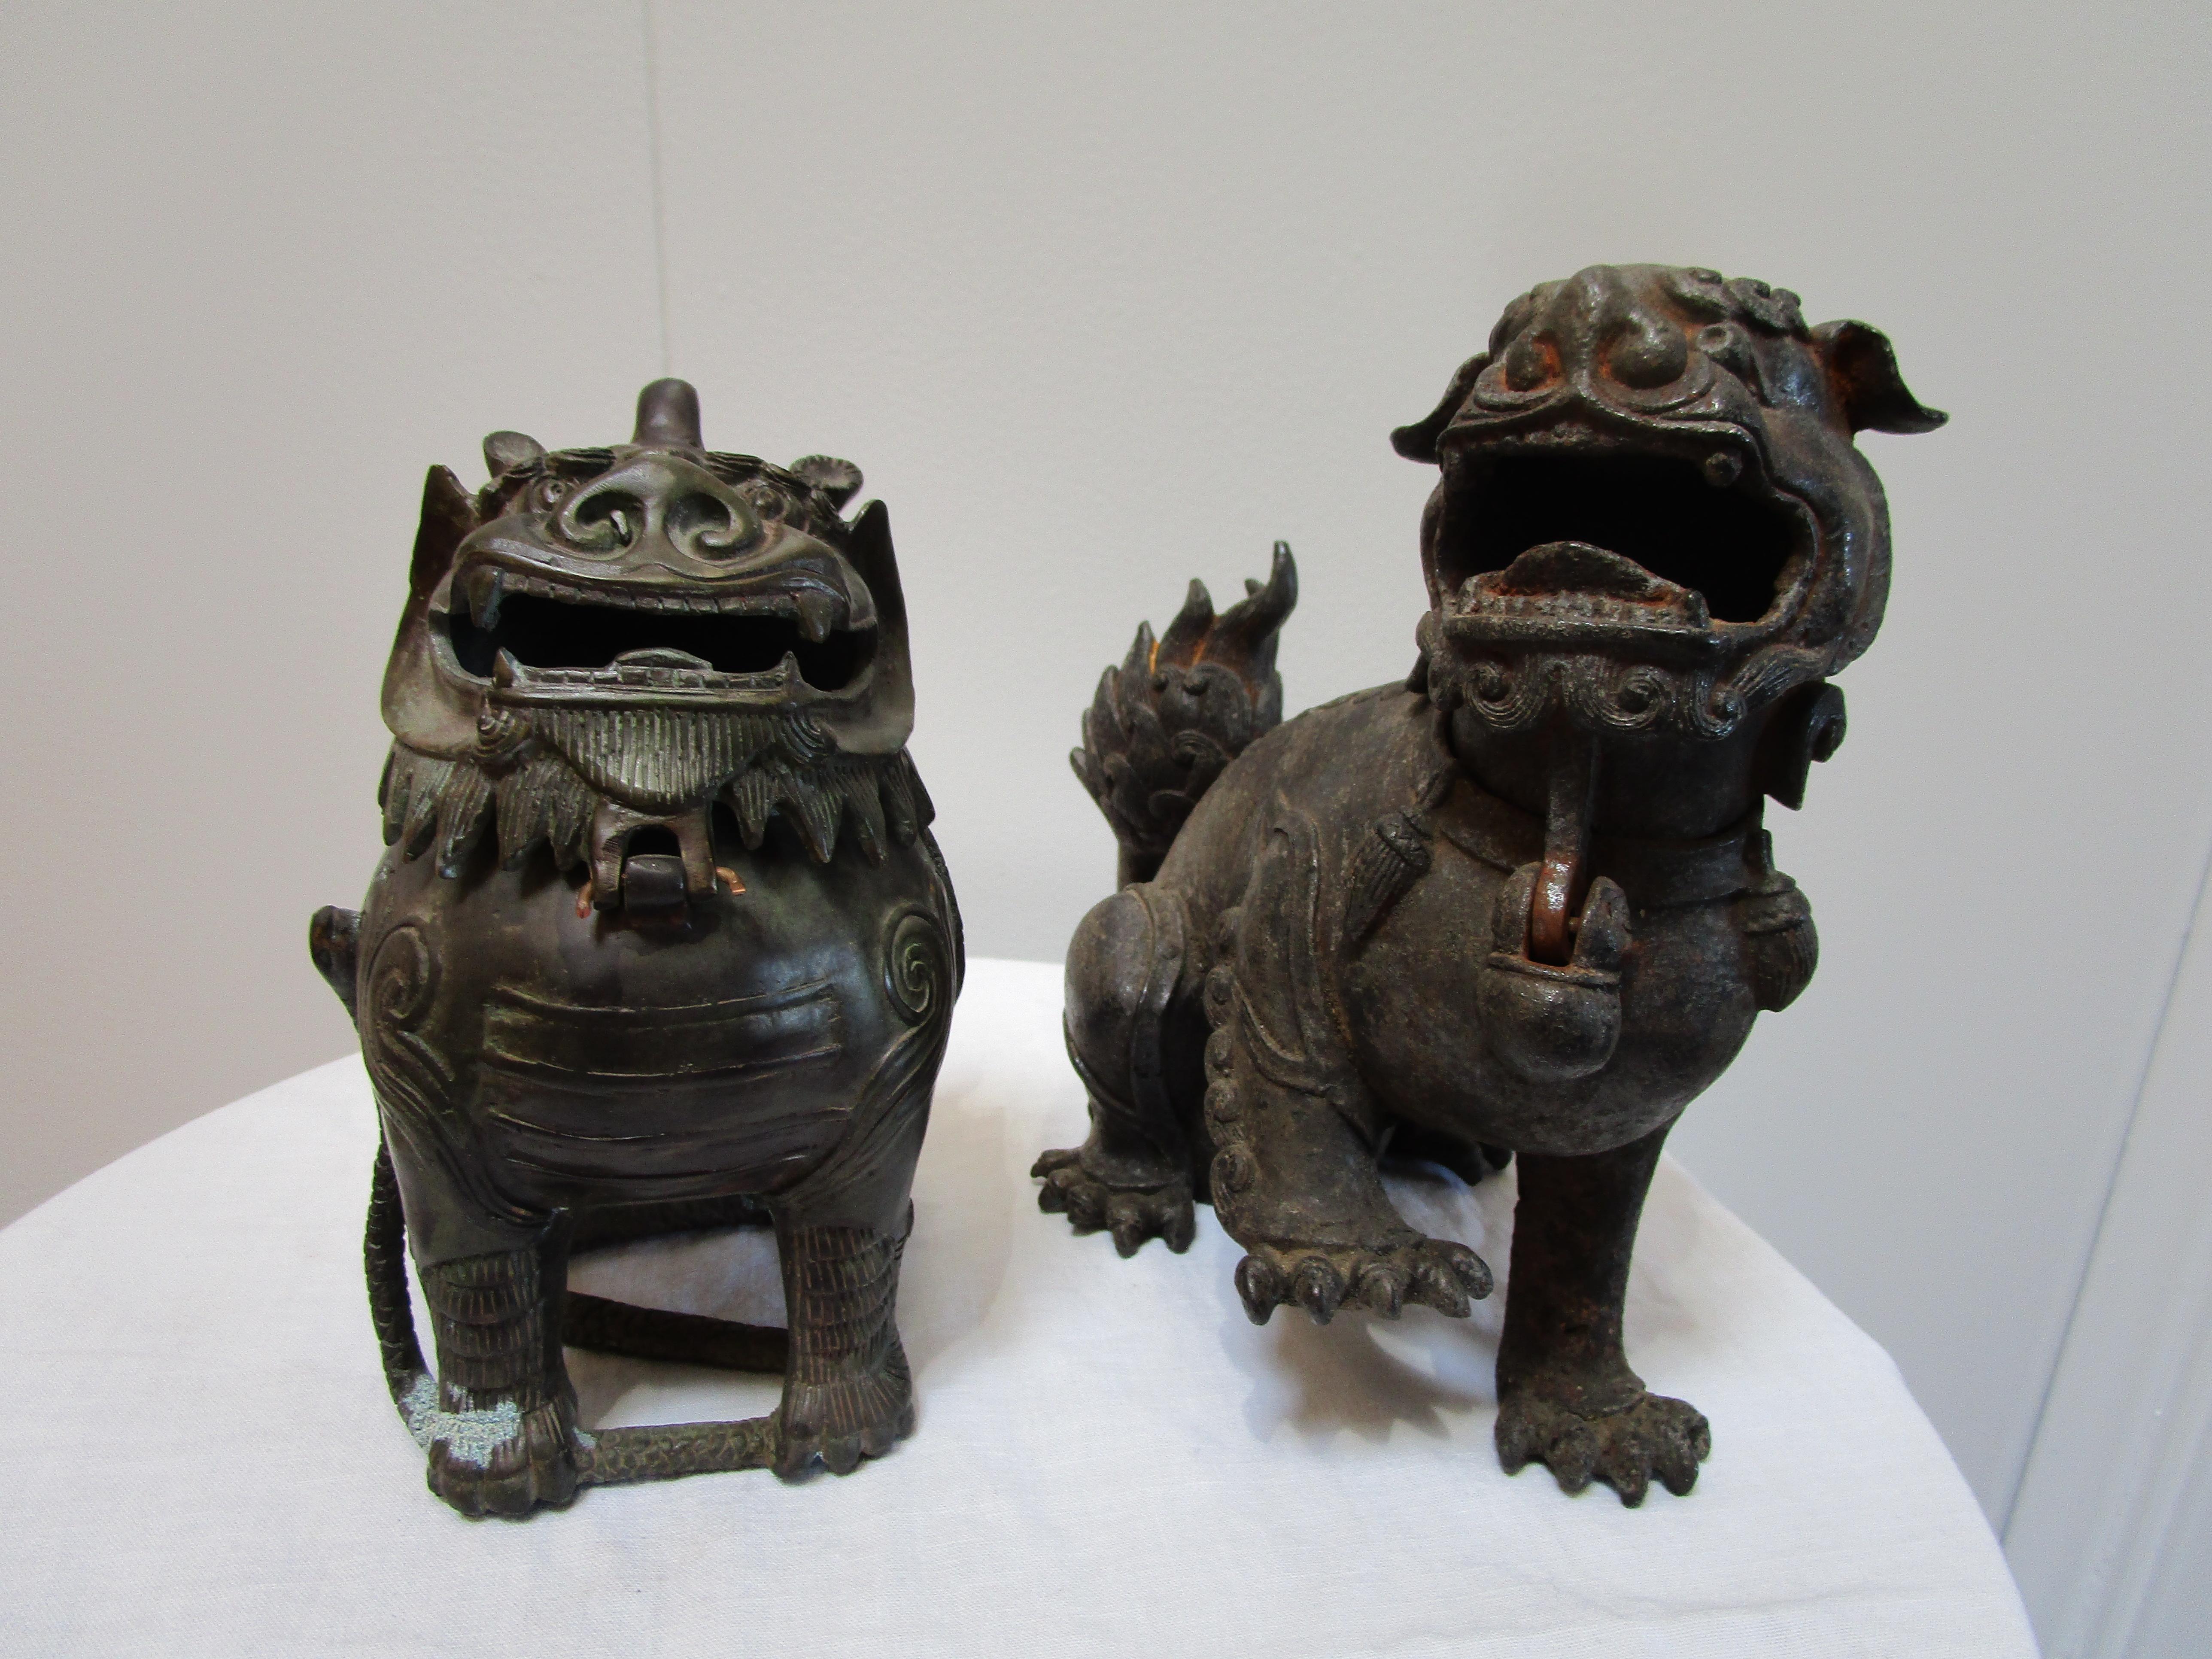 Two Asiatic Lions -- foo dogs protect the premises in an assembled pair. The smaller female lion stands on the body of a dragon that is trapped at her sides. She has a mark with the maker's signature and the year of production. She stands at 5.5